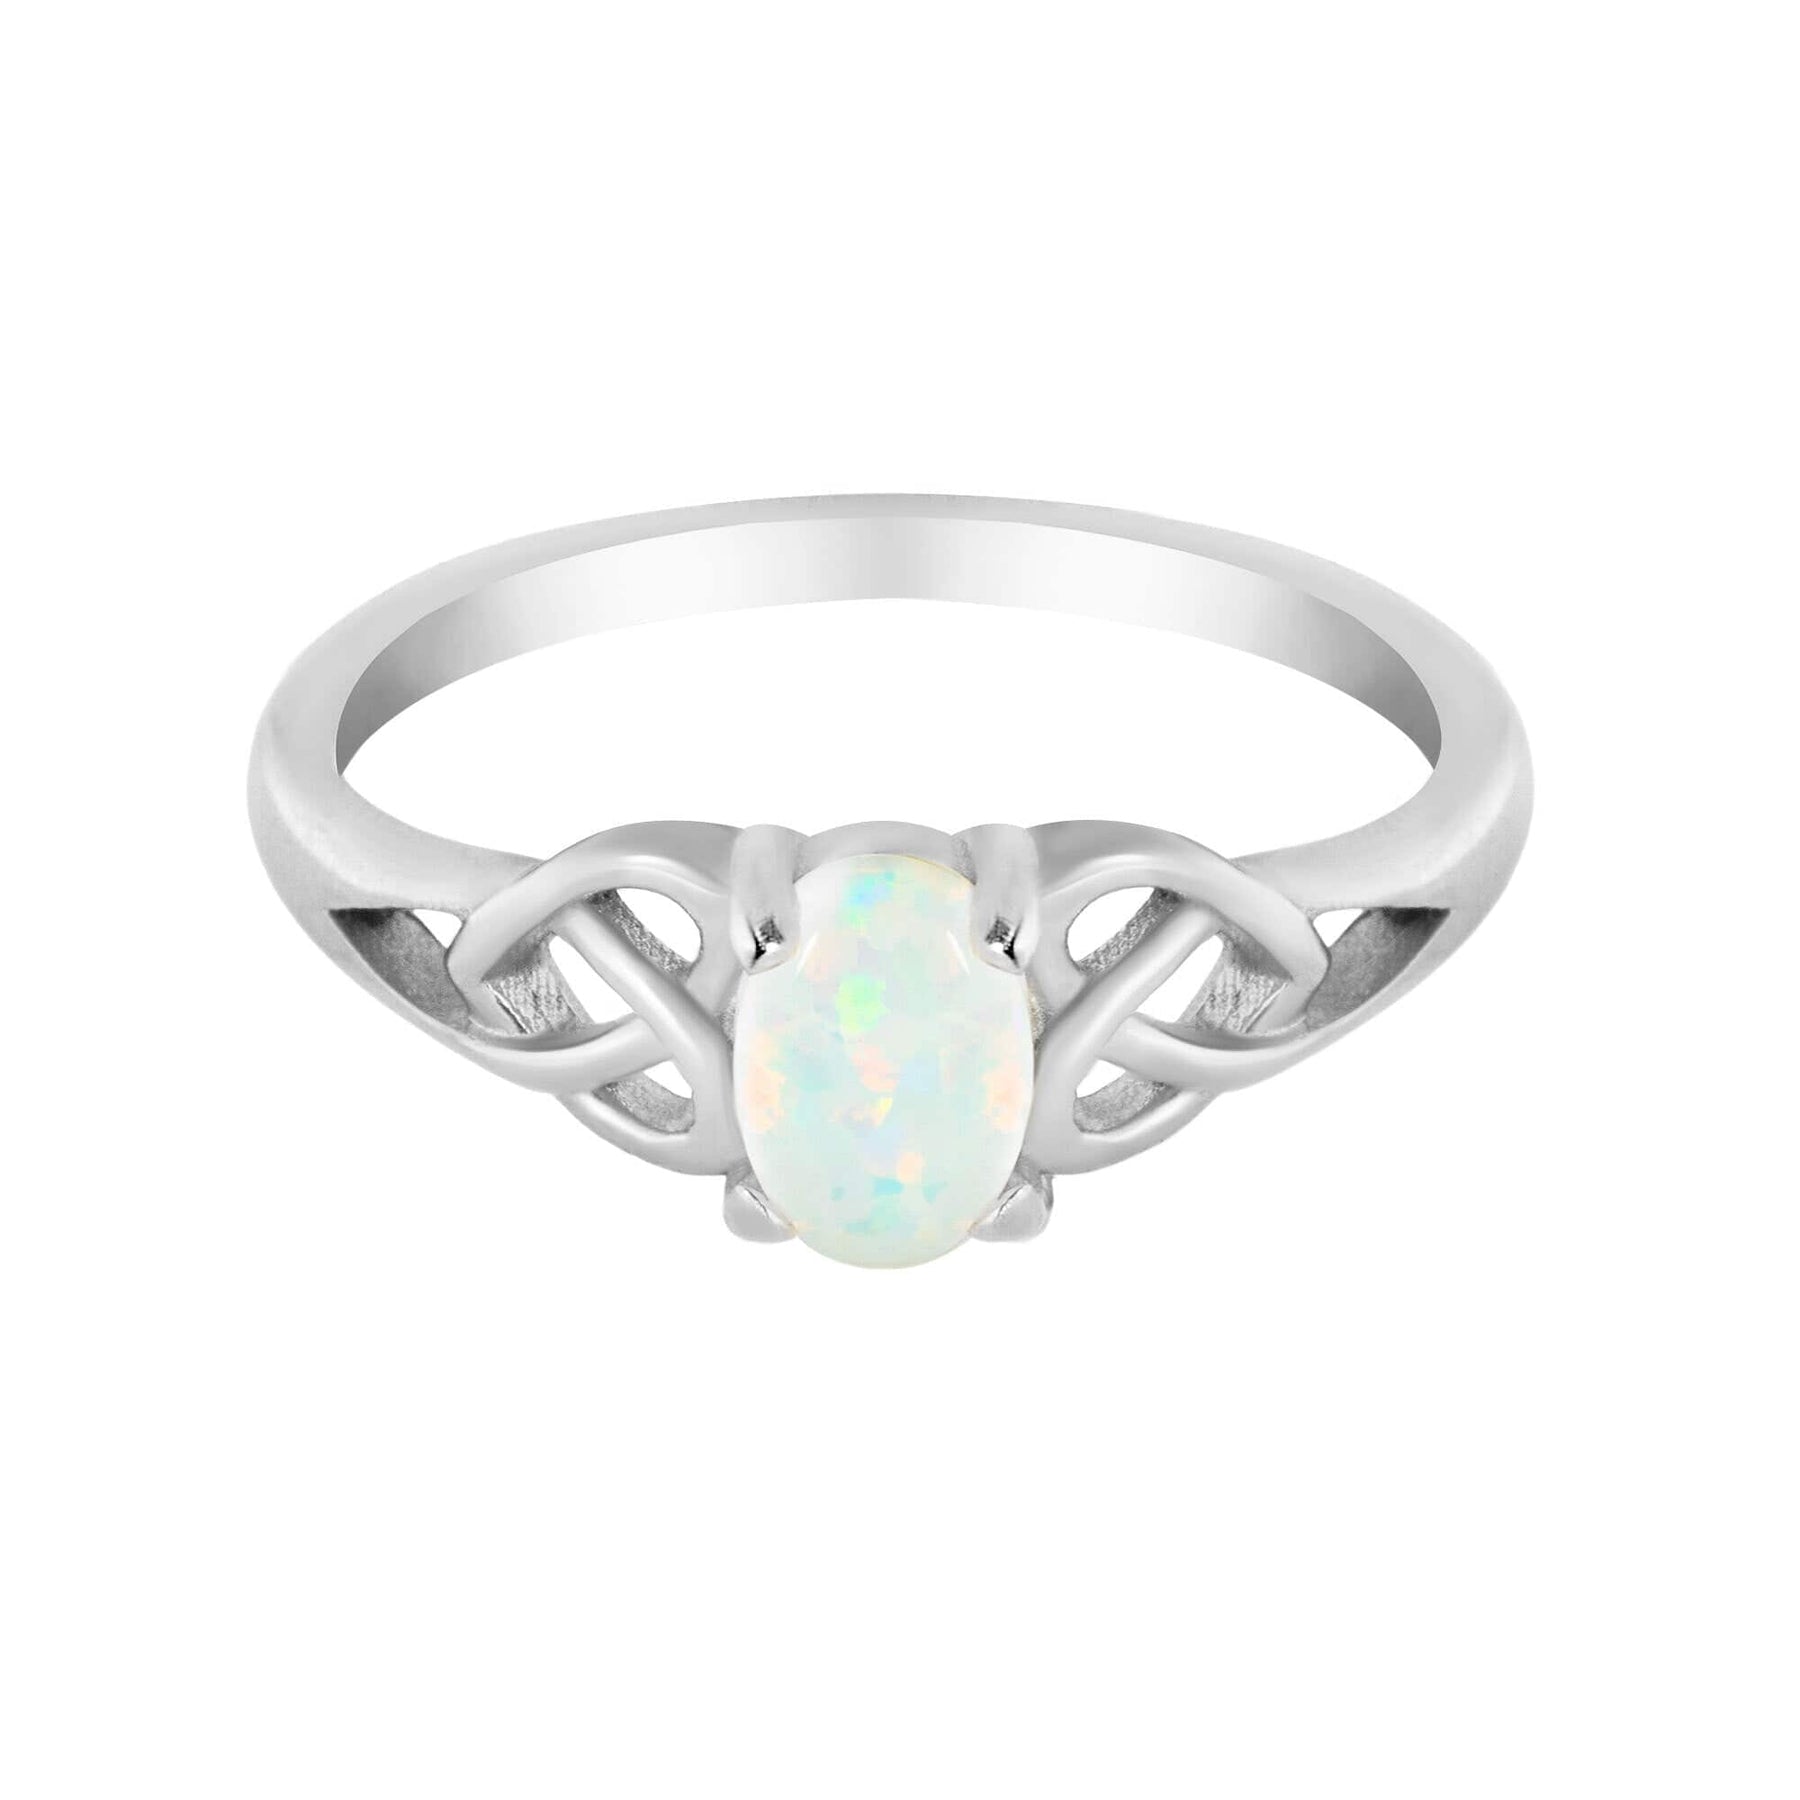 BohoMoon Stainless Steel Forest Opal Ring Silver / US 6 / UK L / EUR 51 (small)